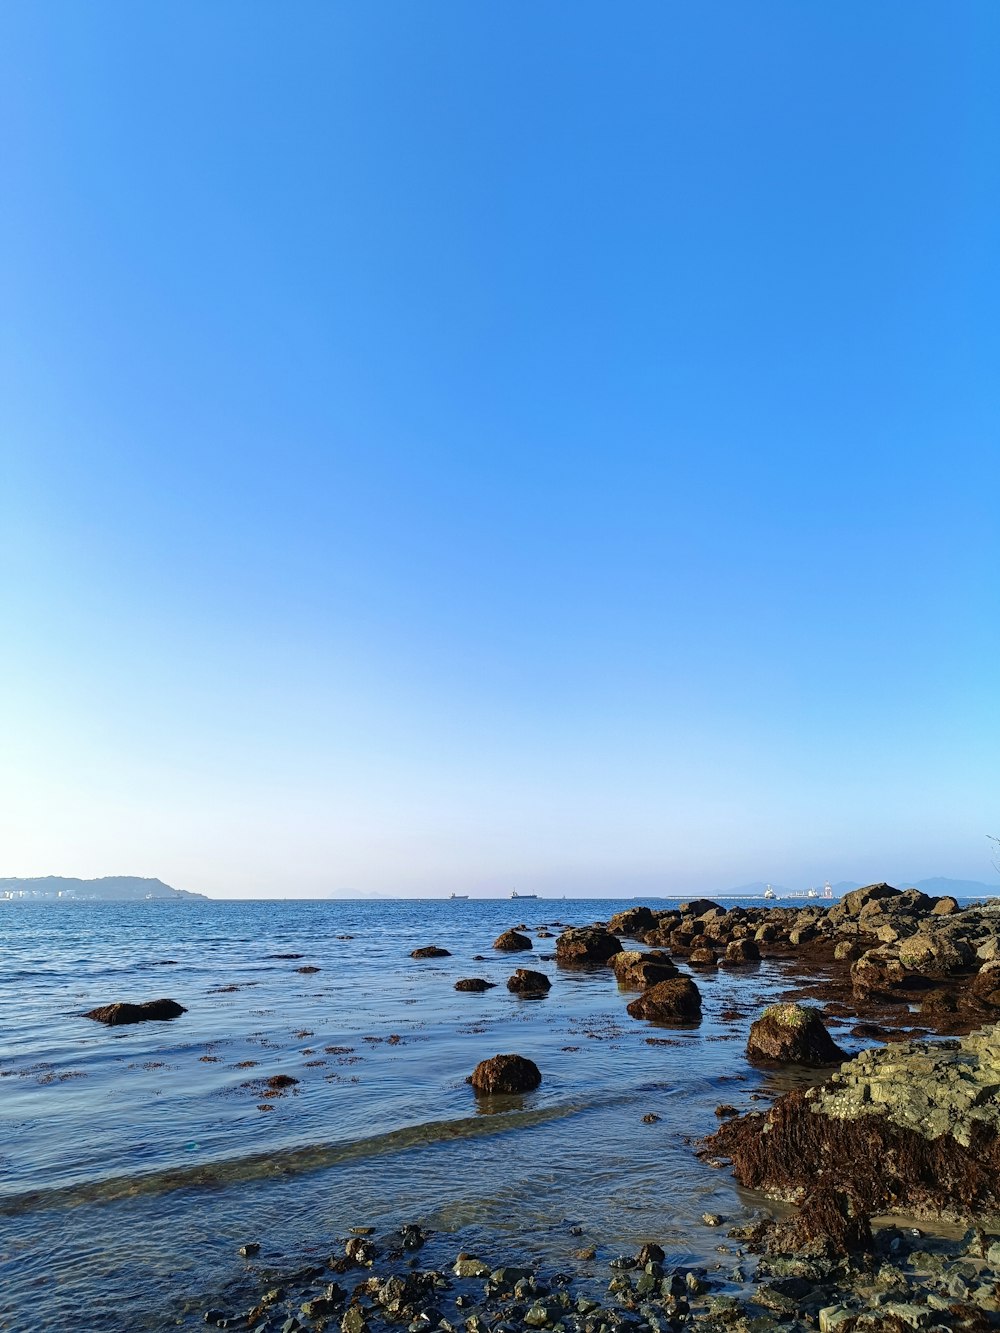 a beach with rocks and water under a blue sky